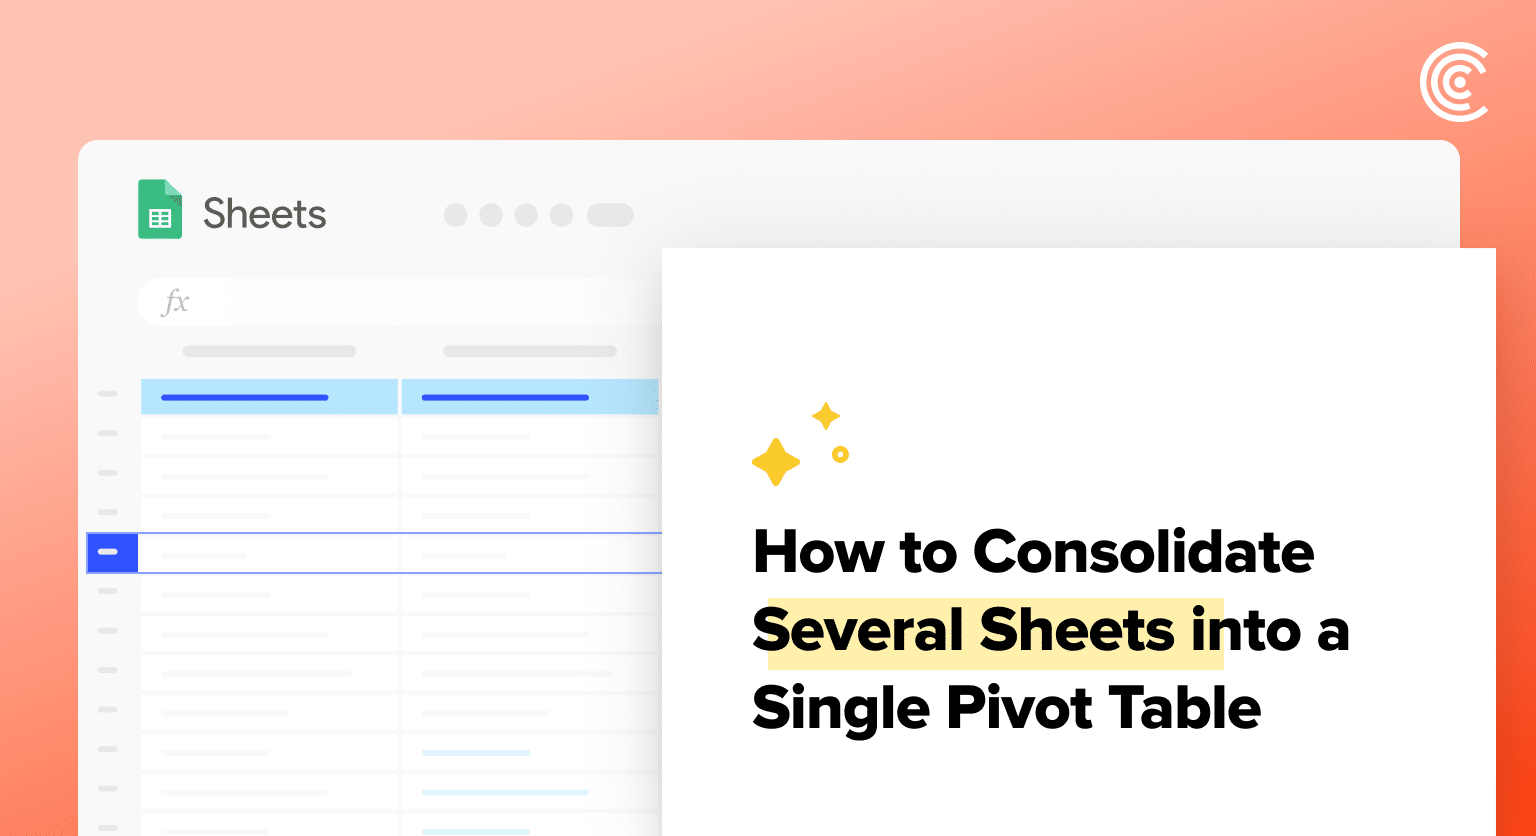 How to Consolidate Several Sheets into a Single Pivot Table